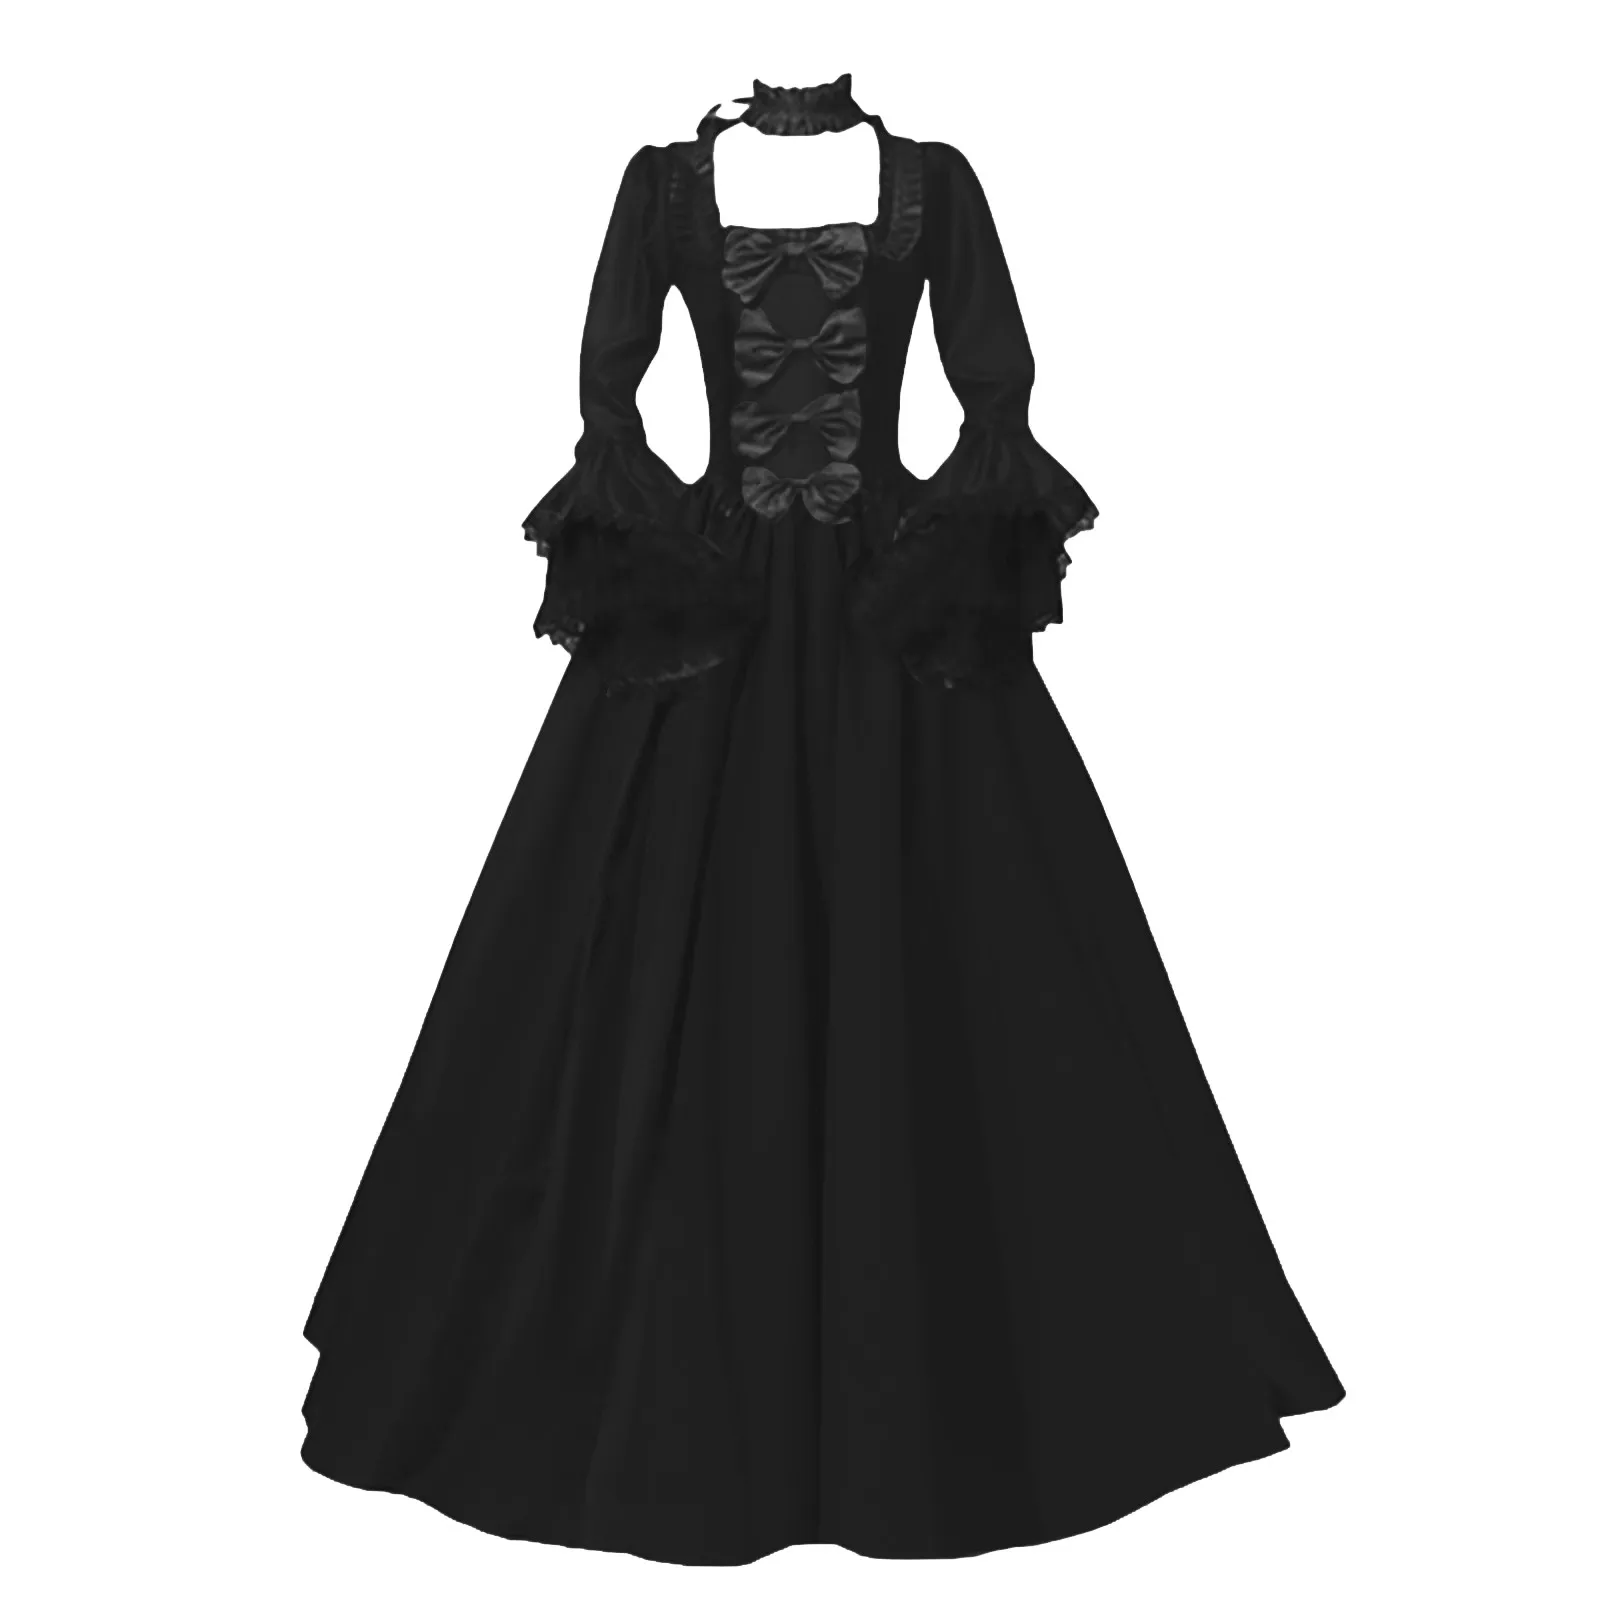 

Women'S Retro Long Sleeve Dress Medieval Victorian Court Lace Stitching Dress Gothic Dress Cosplay Party Costume Gown